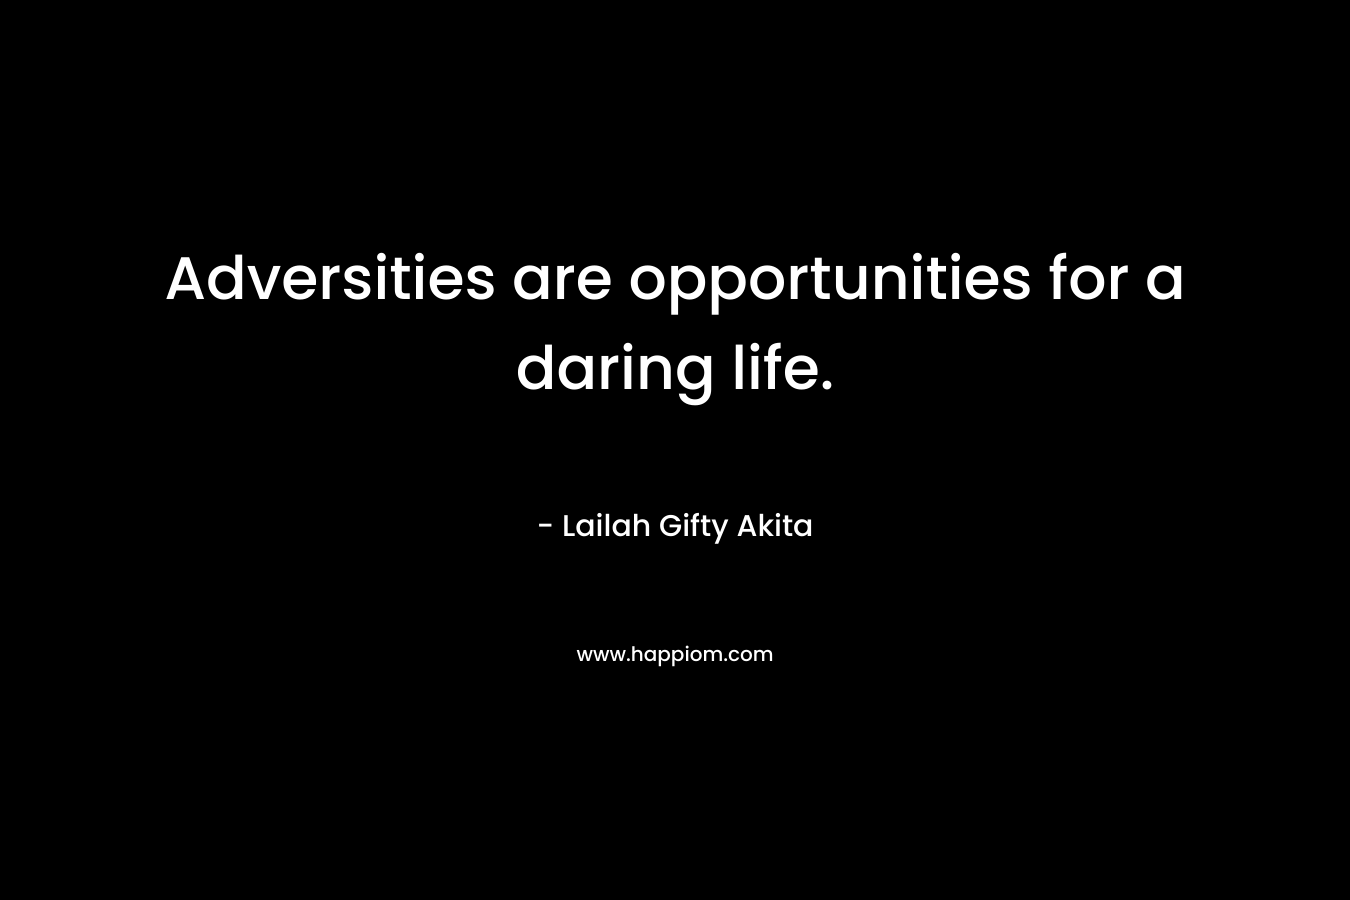 Adversities are opportunities for a daring life.